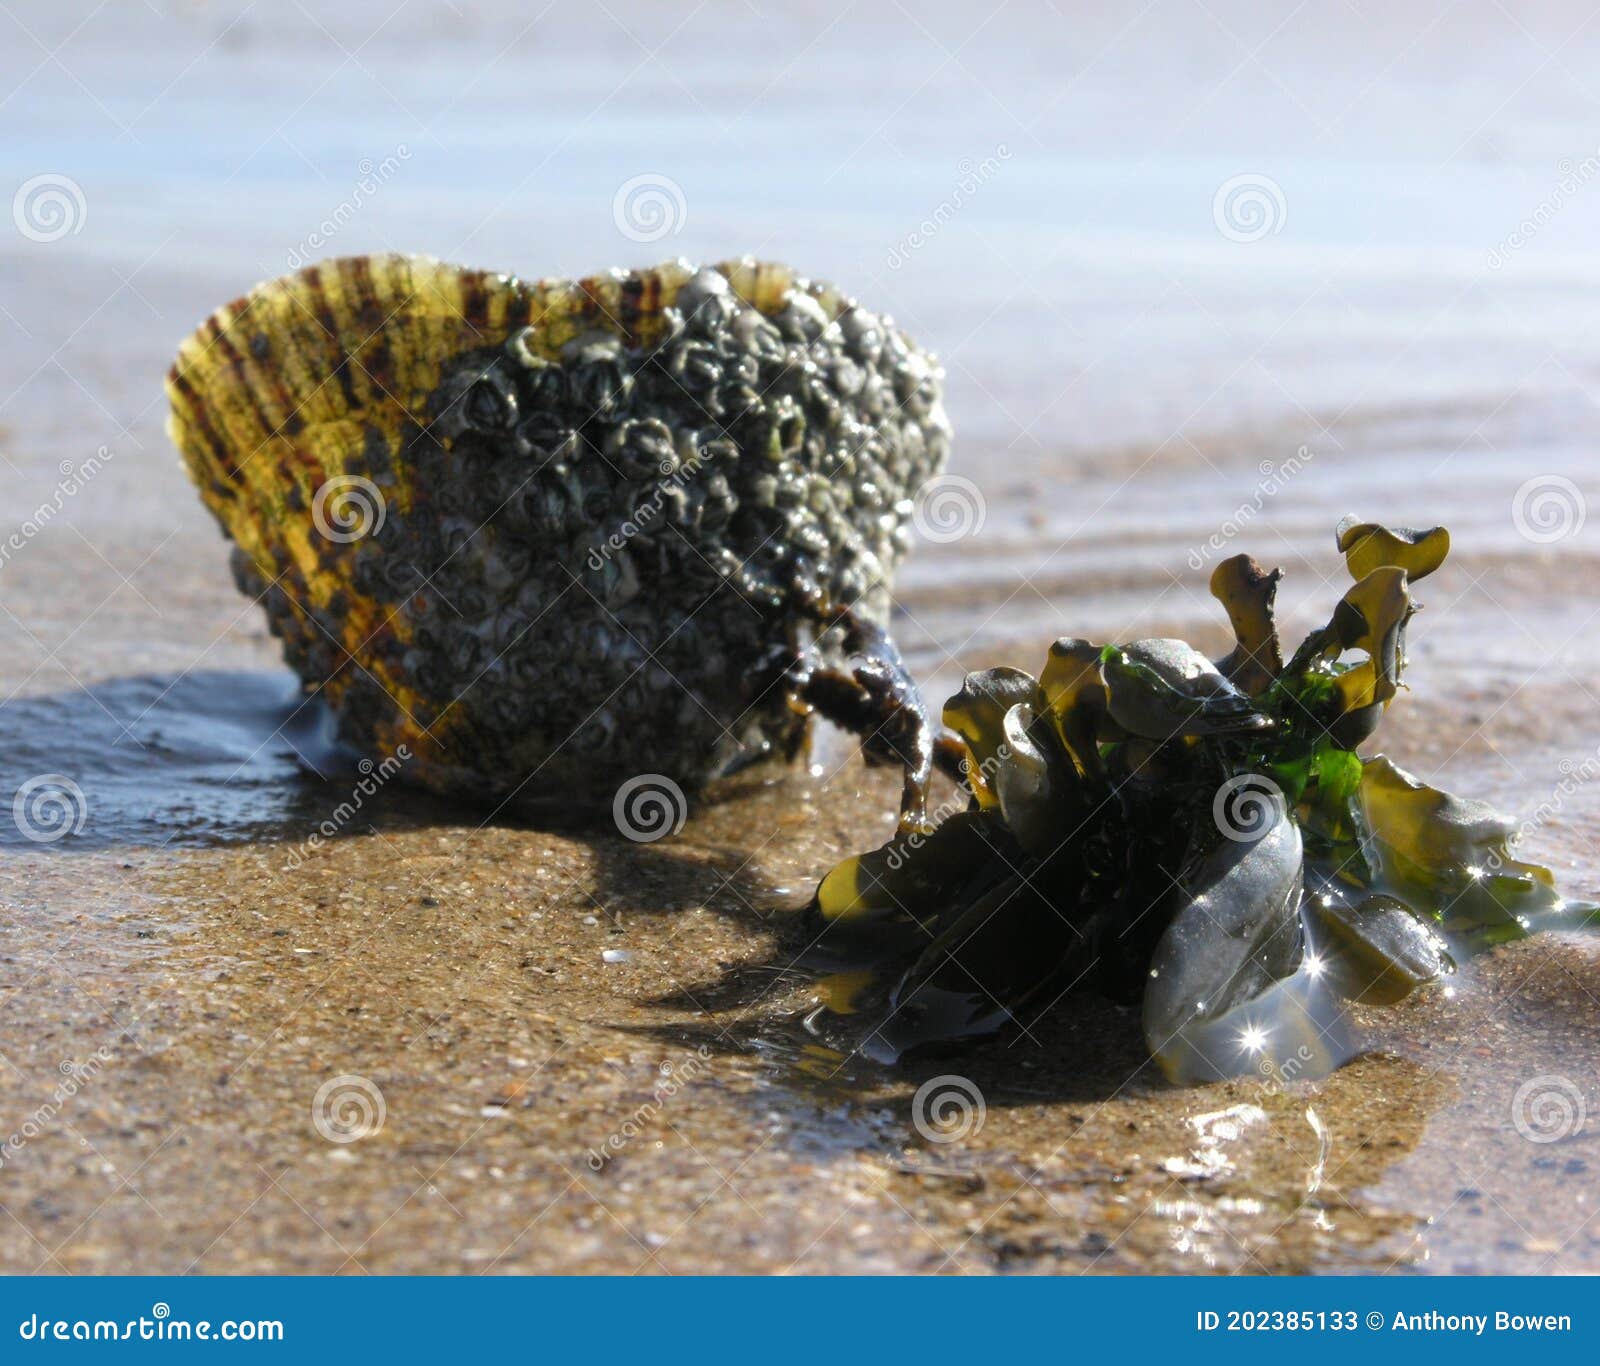 limpet and seaweed neighbours